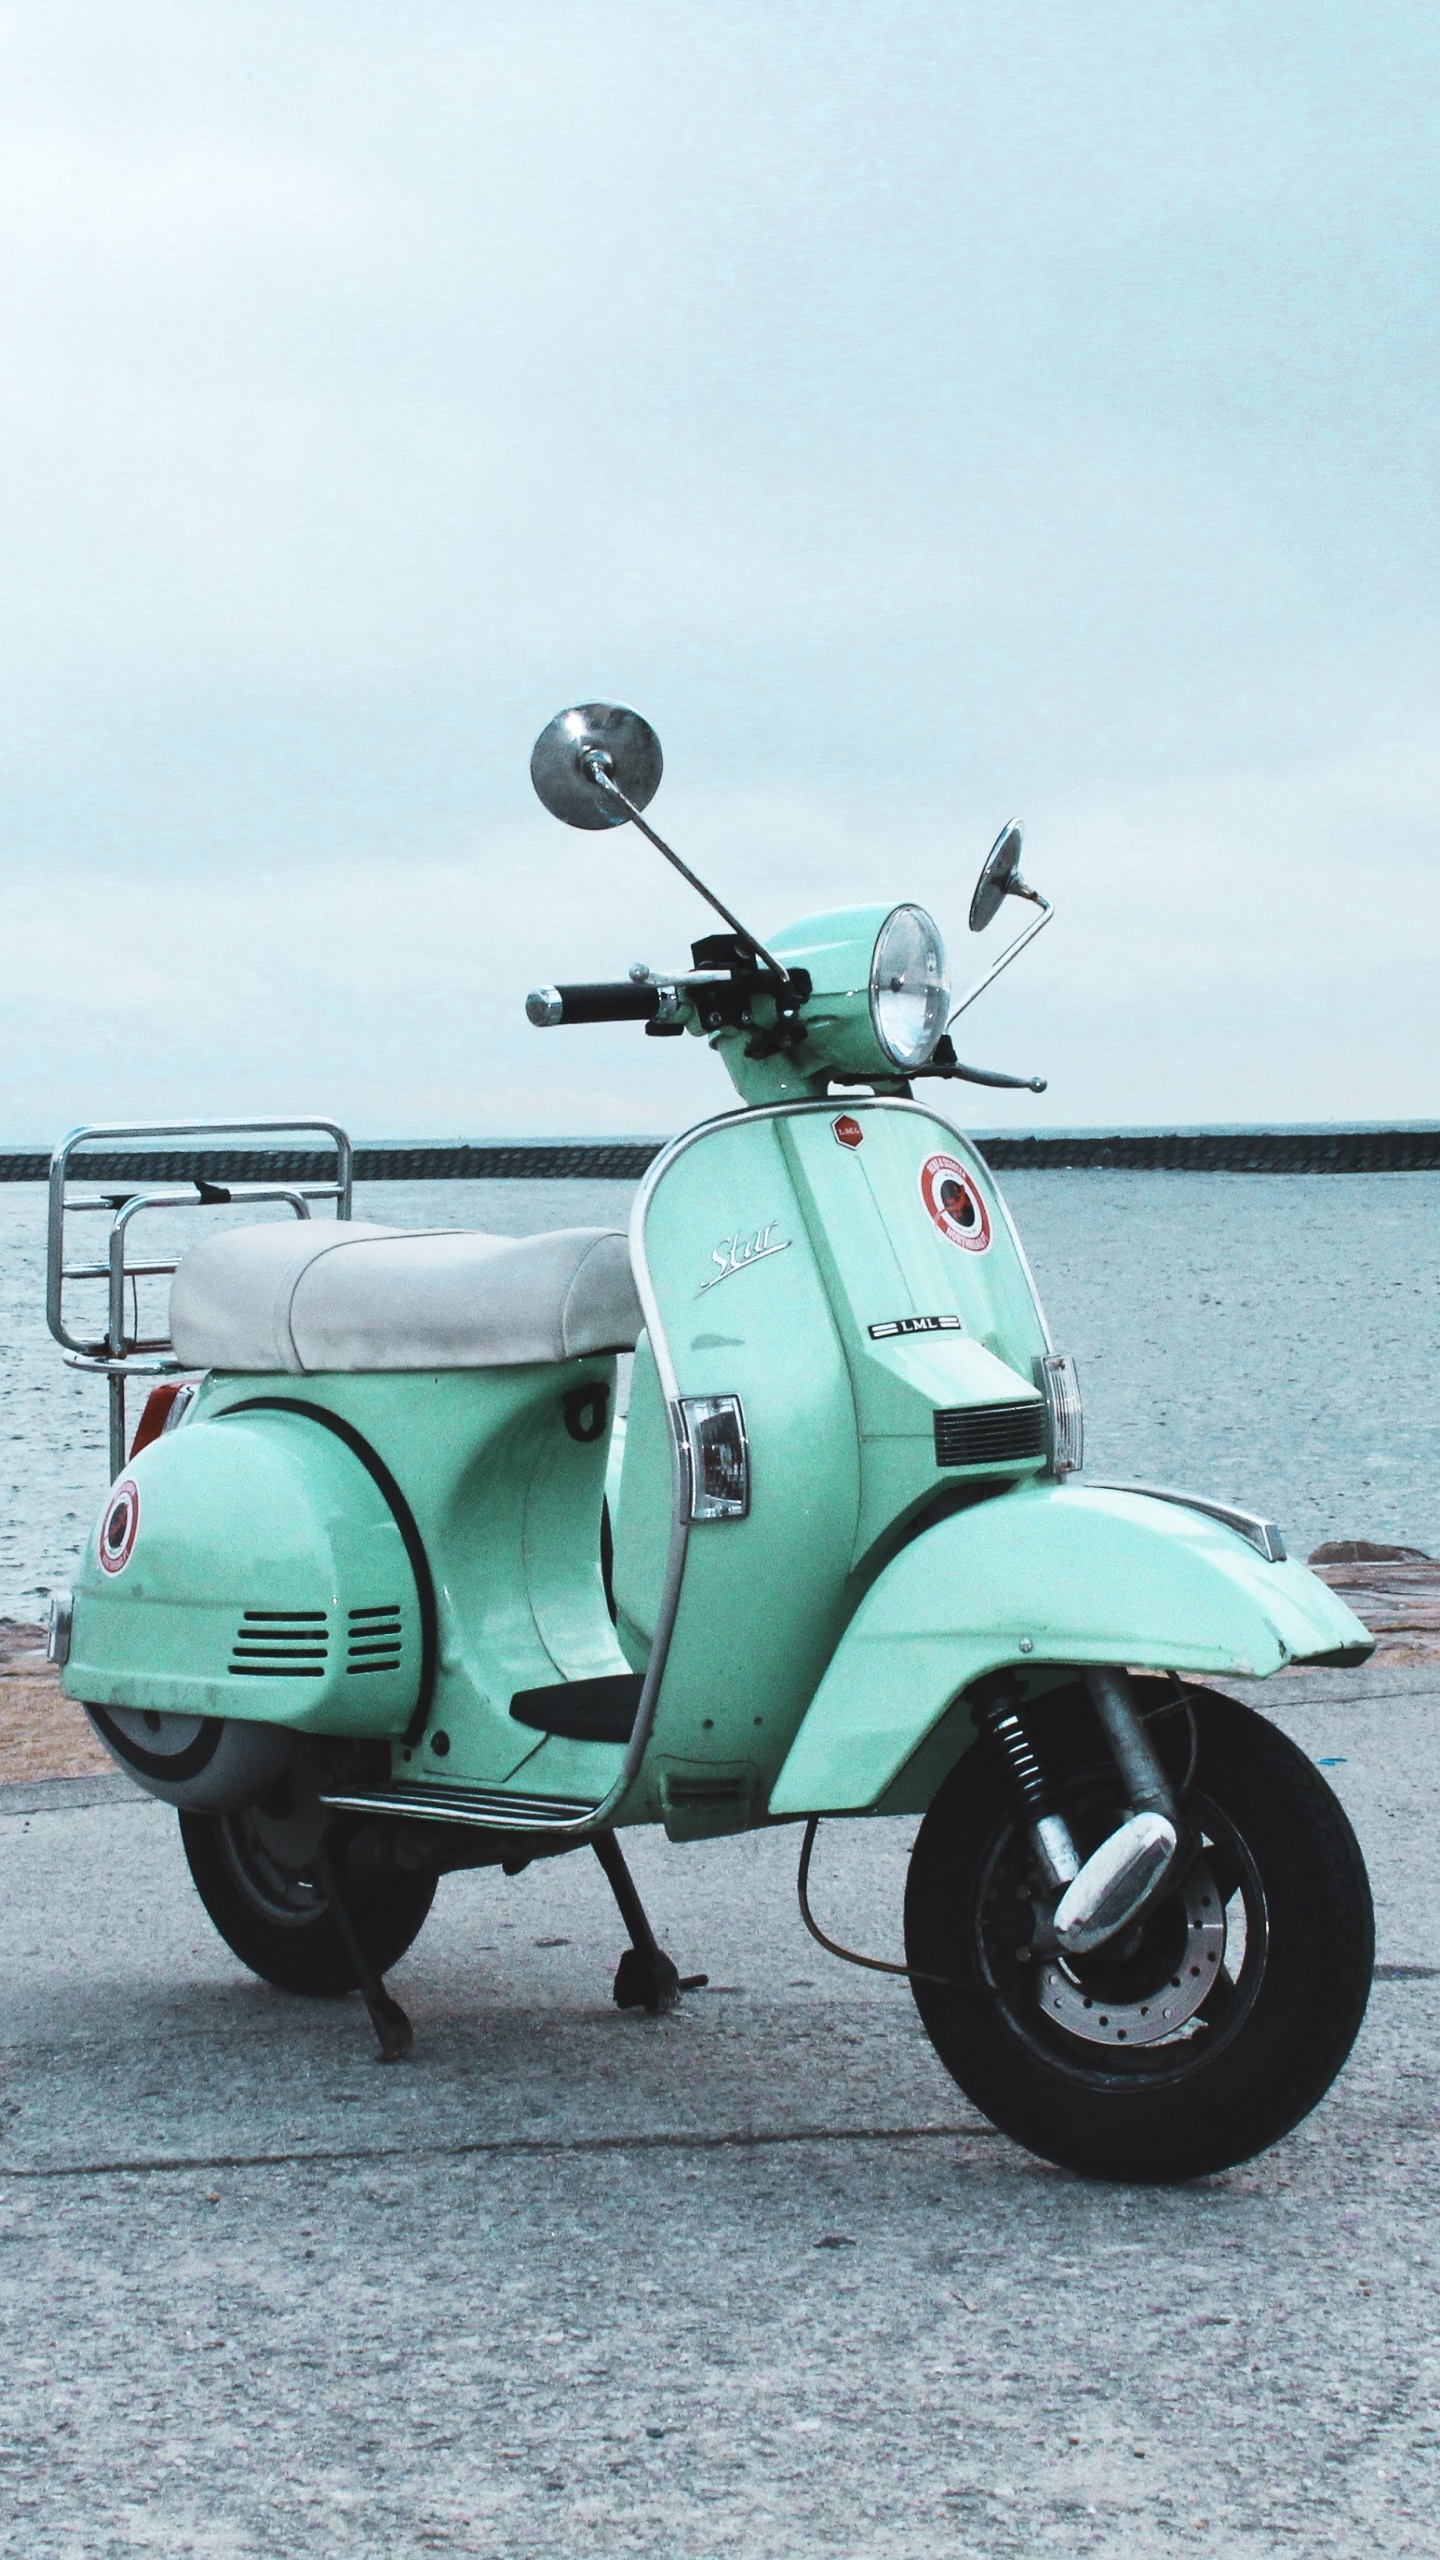 Green Motor Scooter Parked on Gray Concrete Pavement Near Body of Water During Daytime. Wallpaper in 1440x2560 Resolution